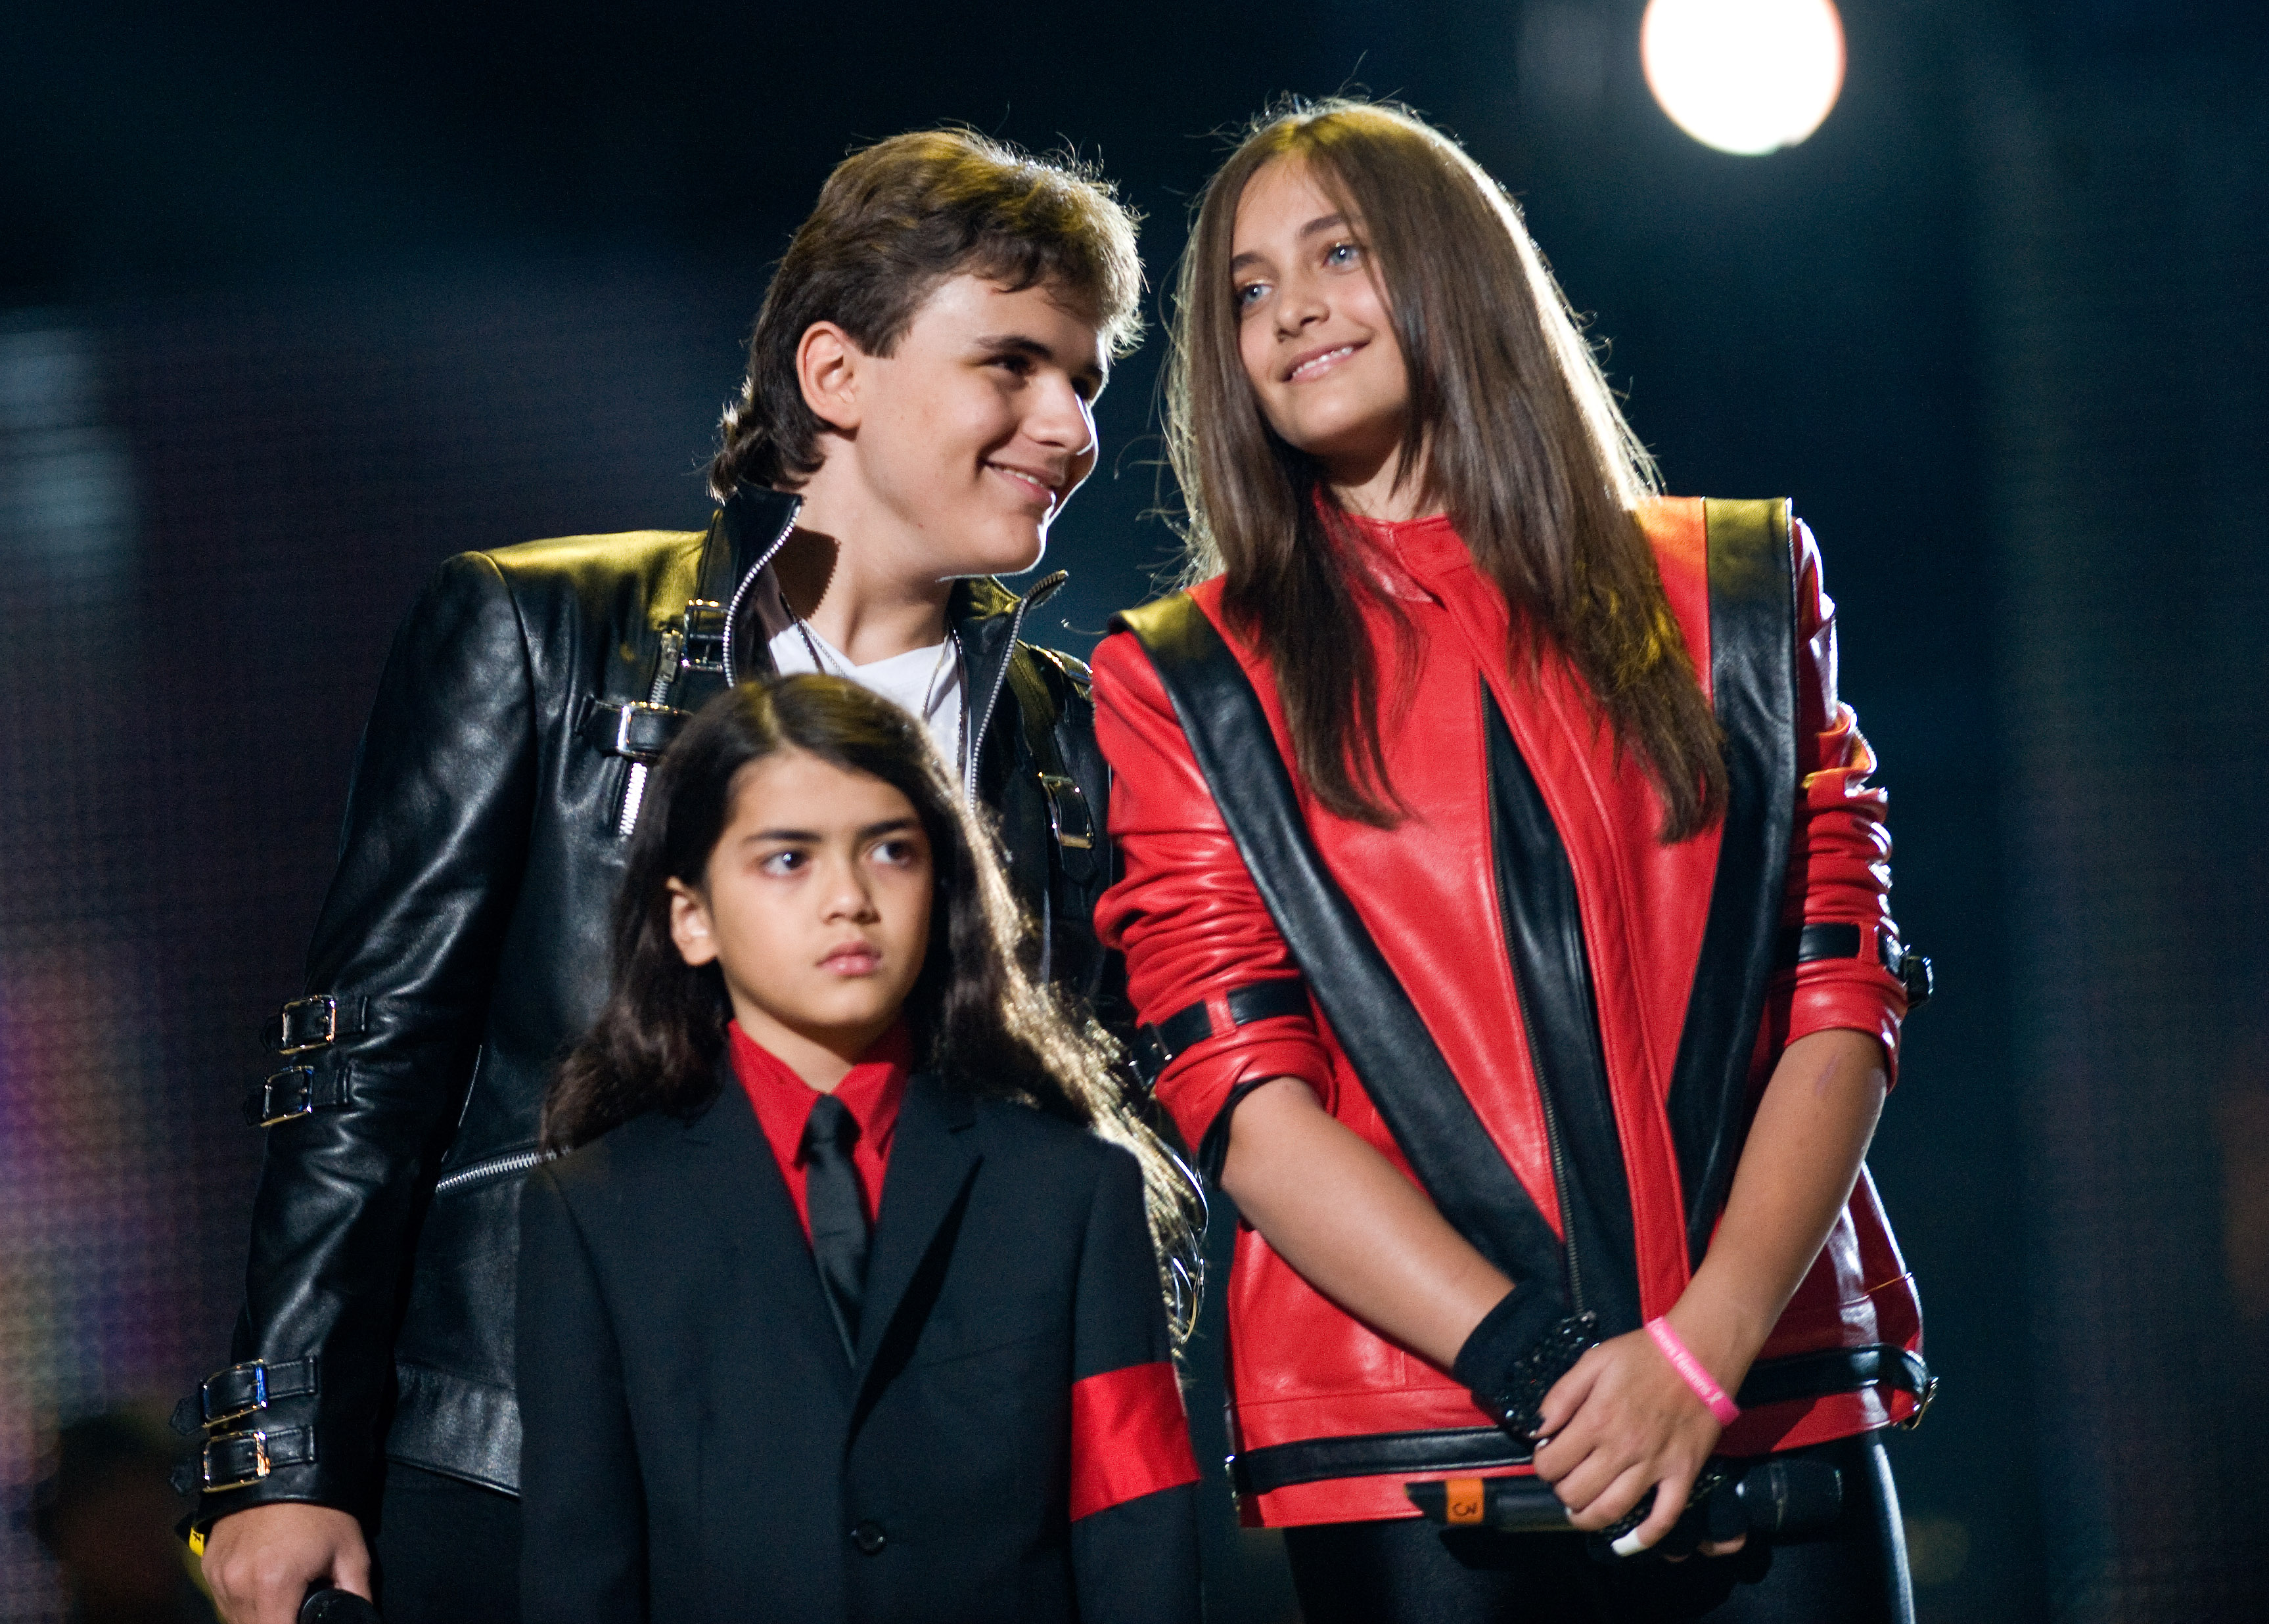 Bigi, Prince, and Paris Jackson at the Michael Forever Tribute Concert in Cardiff, Wales on October 8, 2011 | Source: Getty Images